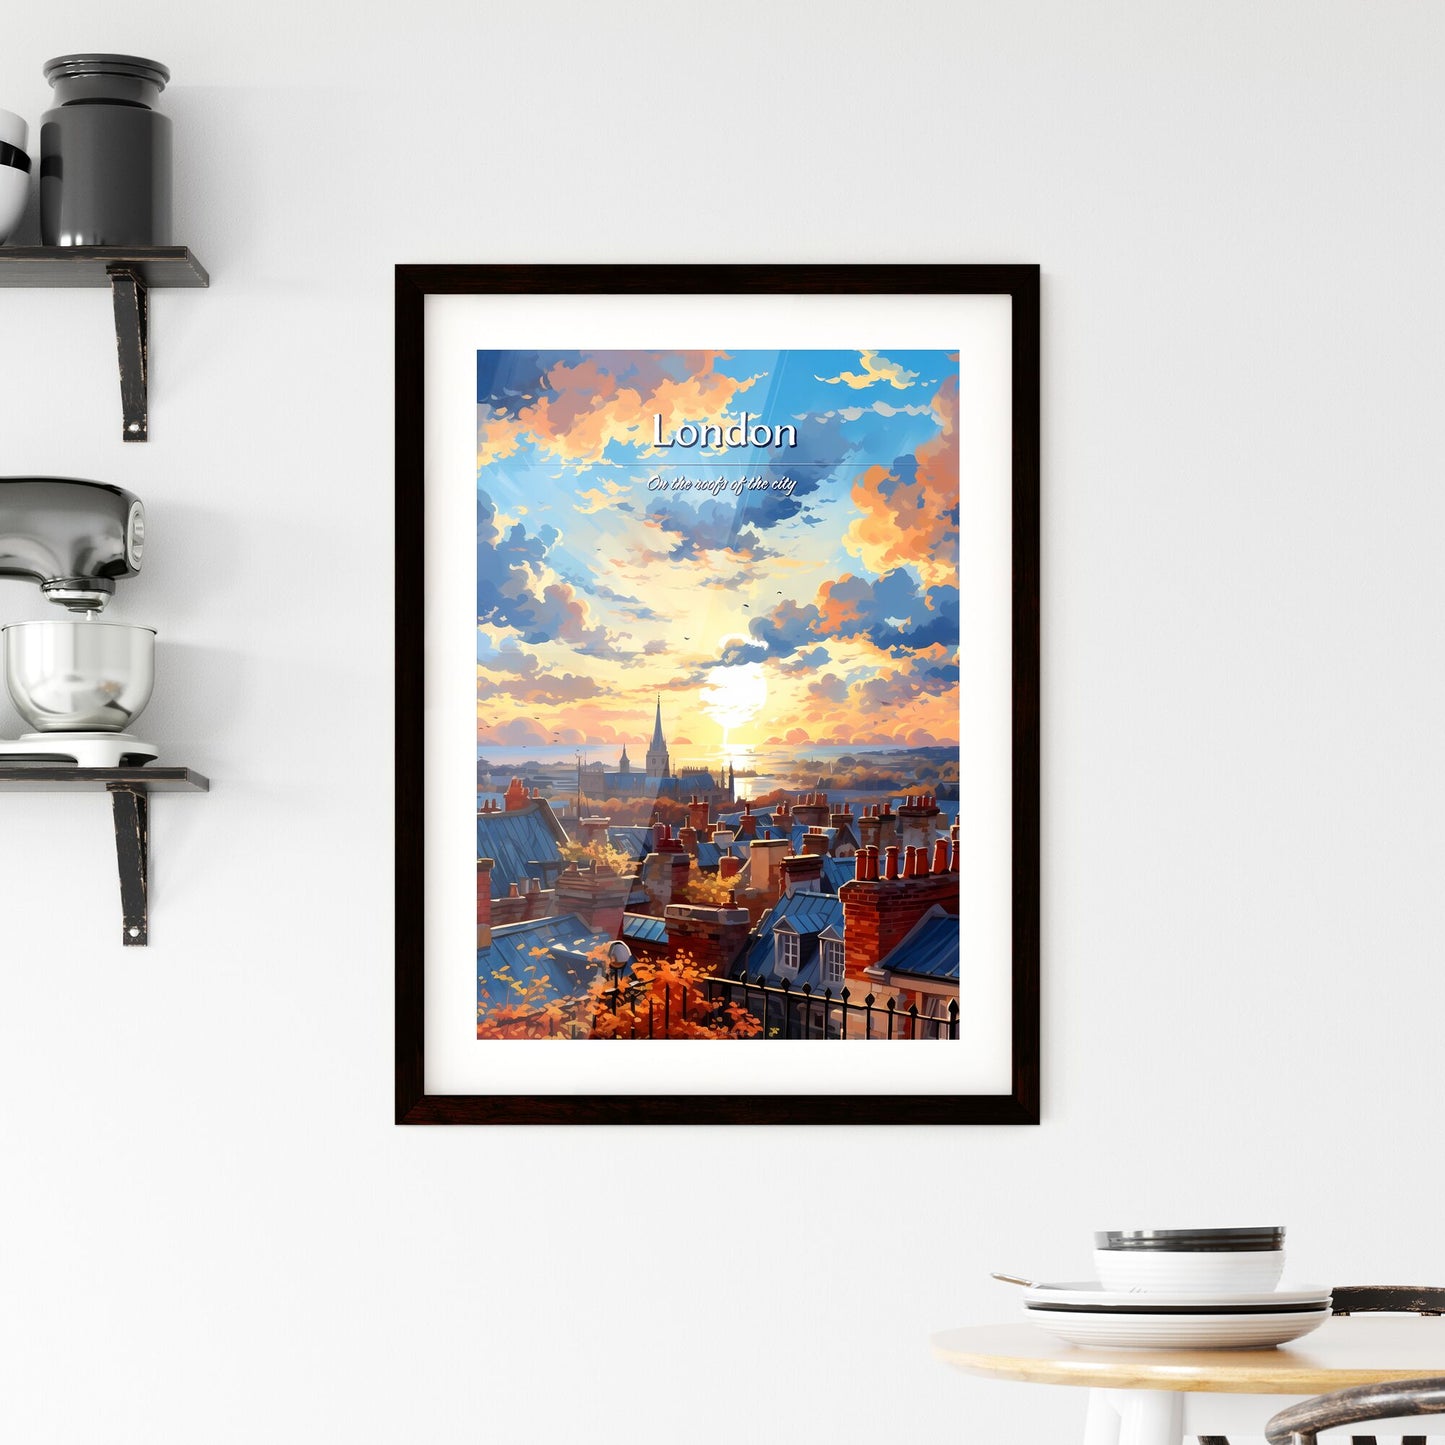 On the roofs of London, UK - Art print of a rooftops of a town with a city and a body of water Default Title